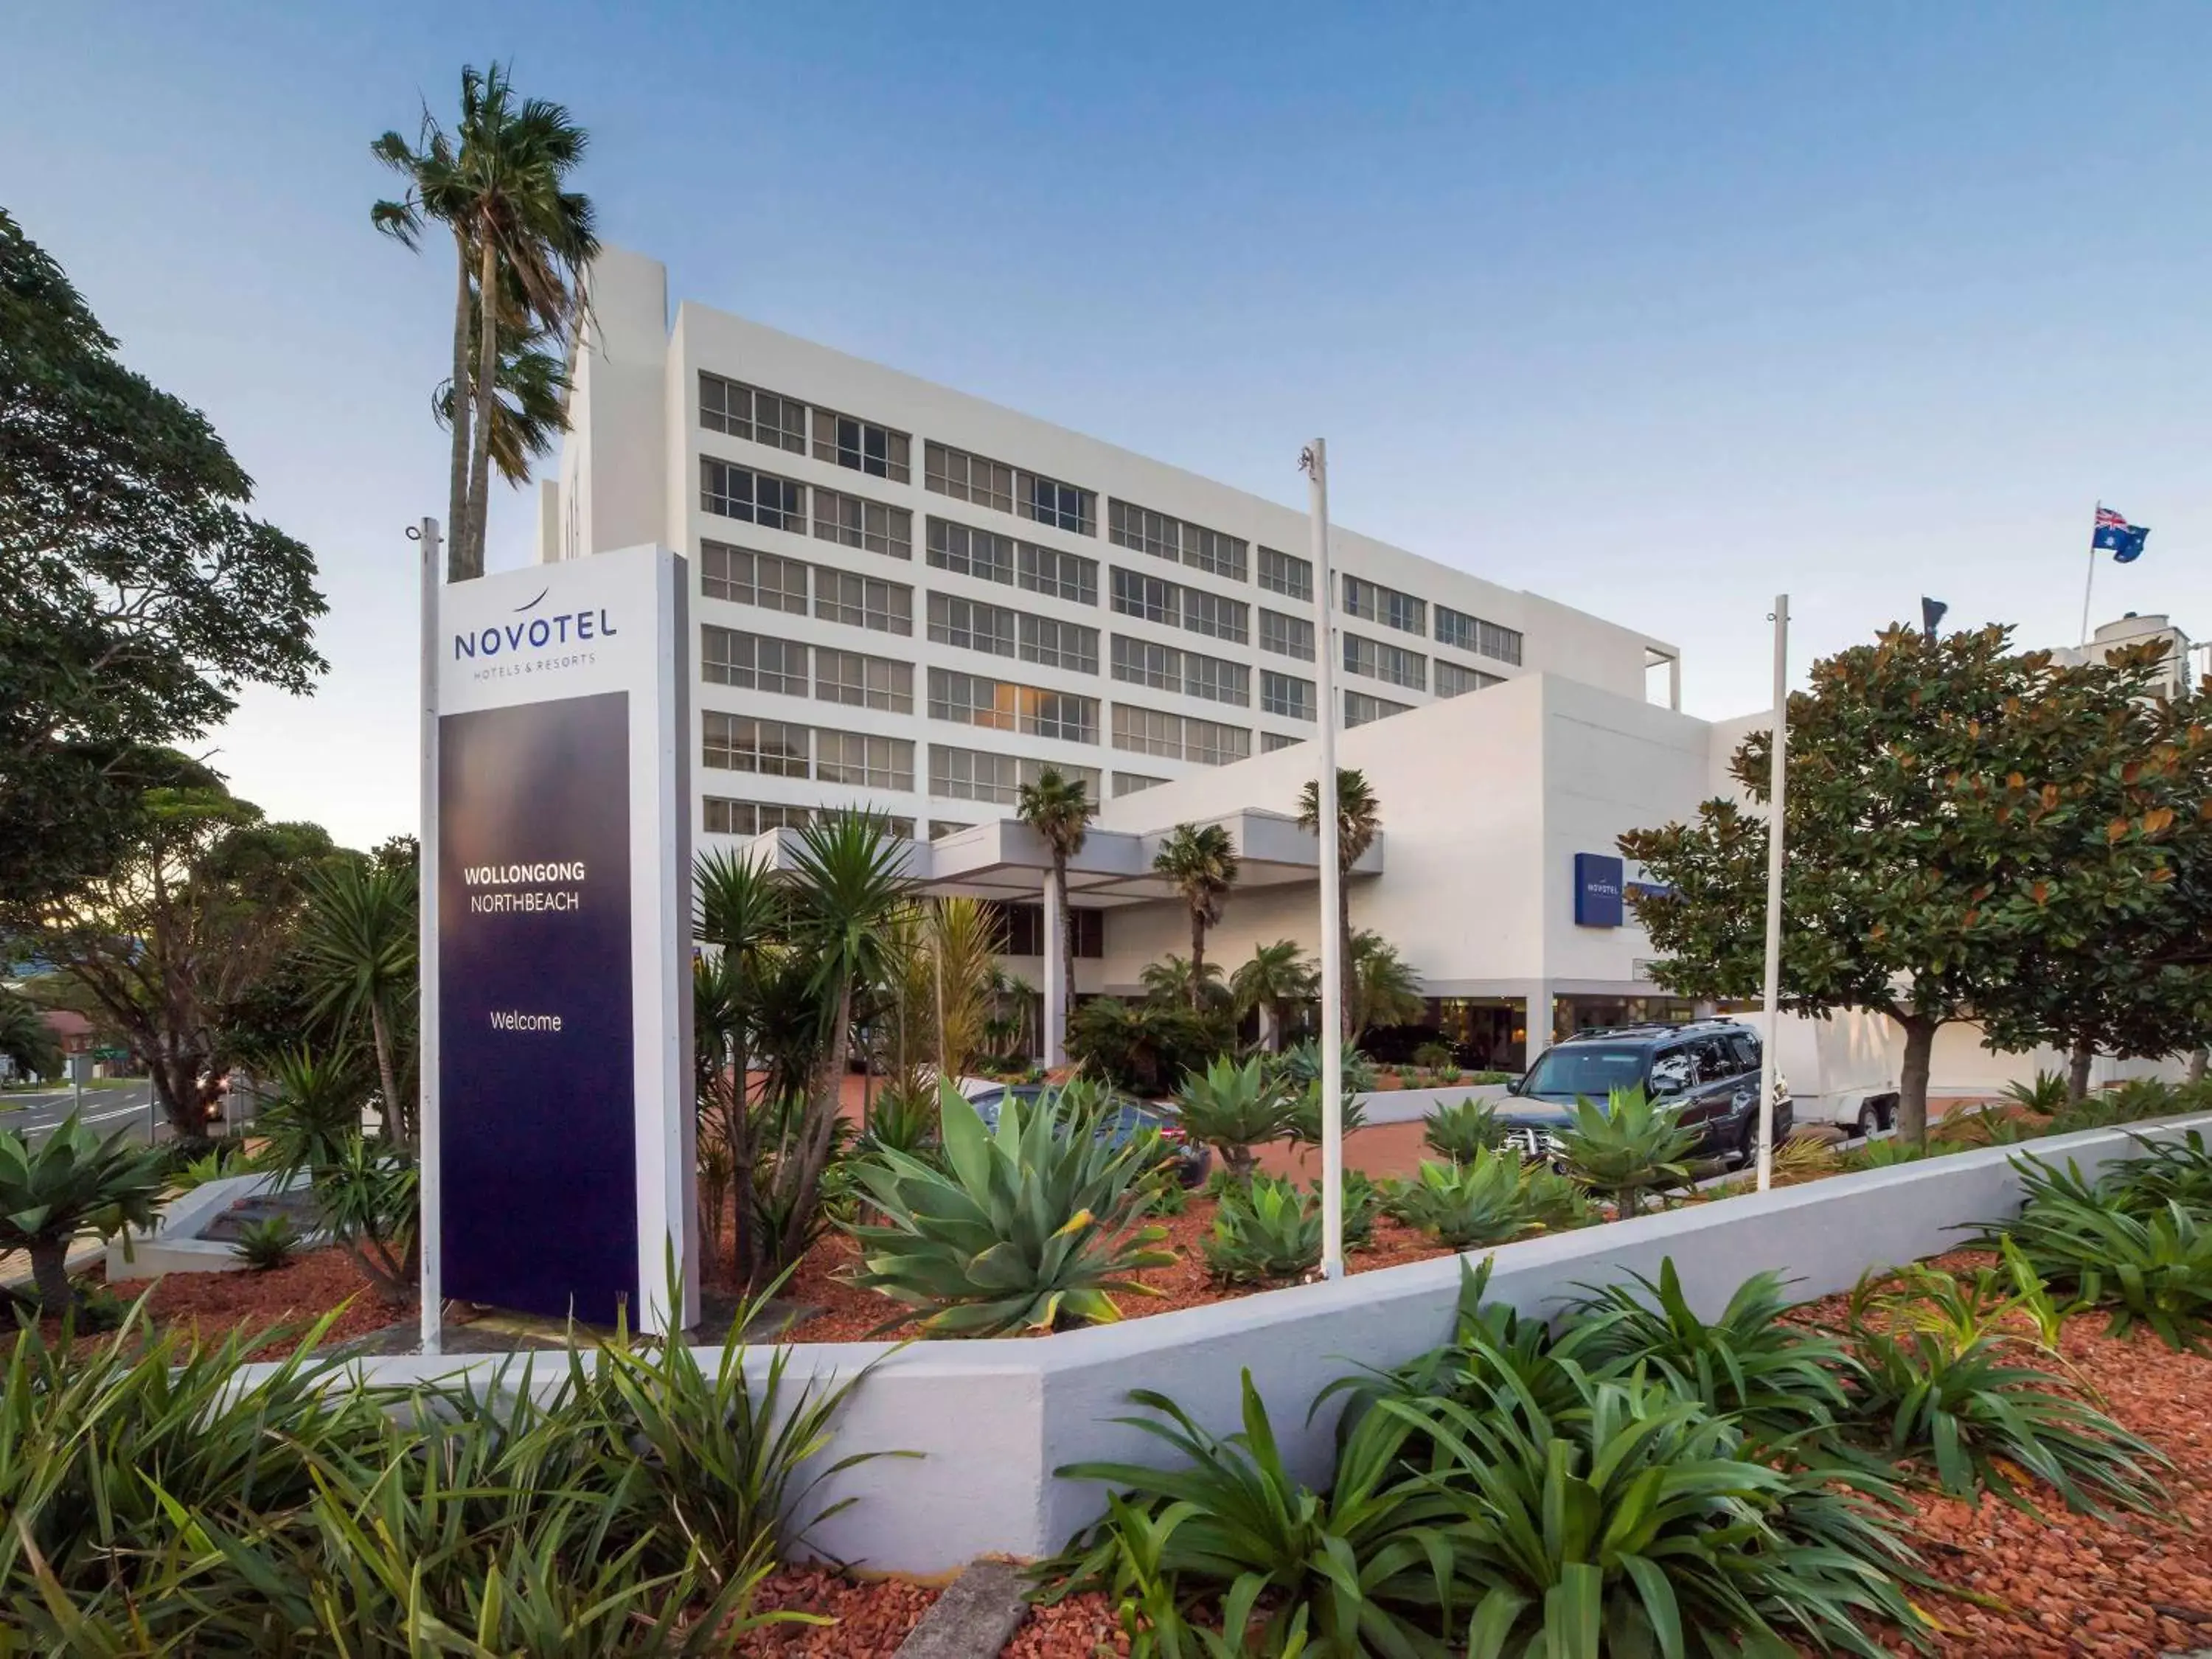 Property Building in Novotel Wollongong Northbeach